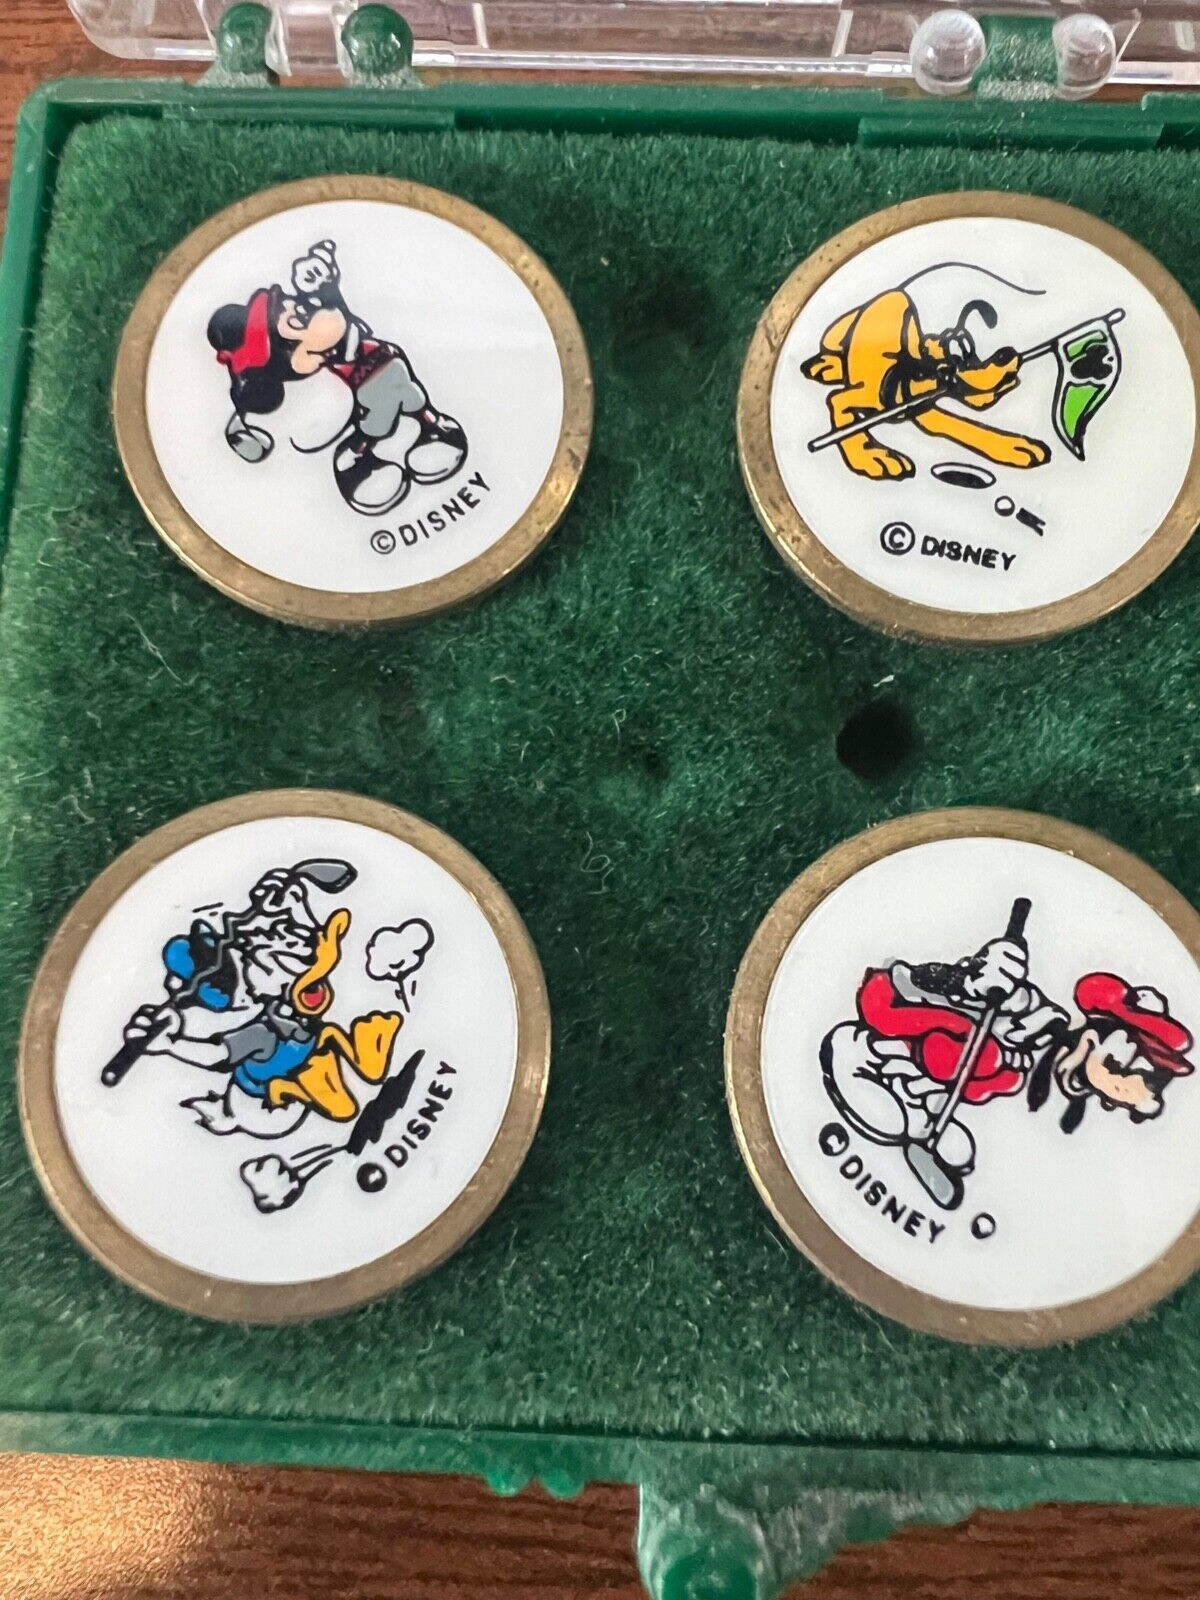 Vintage Disney golf ball markers, Mickey, Goofy, Donald Duck and Pluto, set of 4